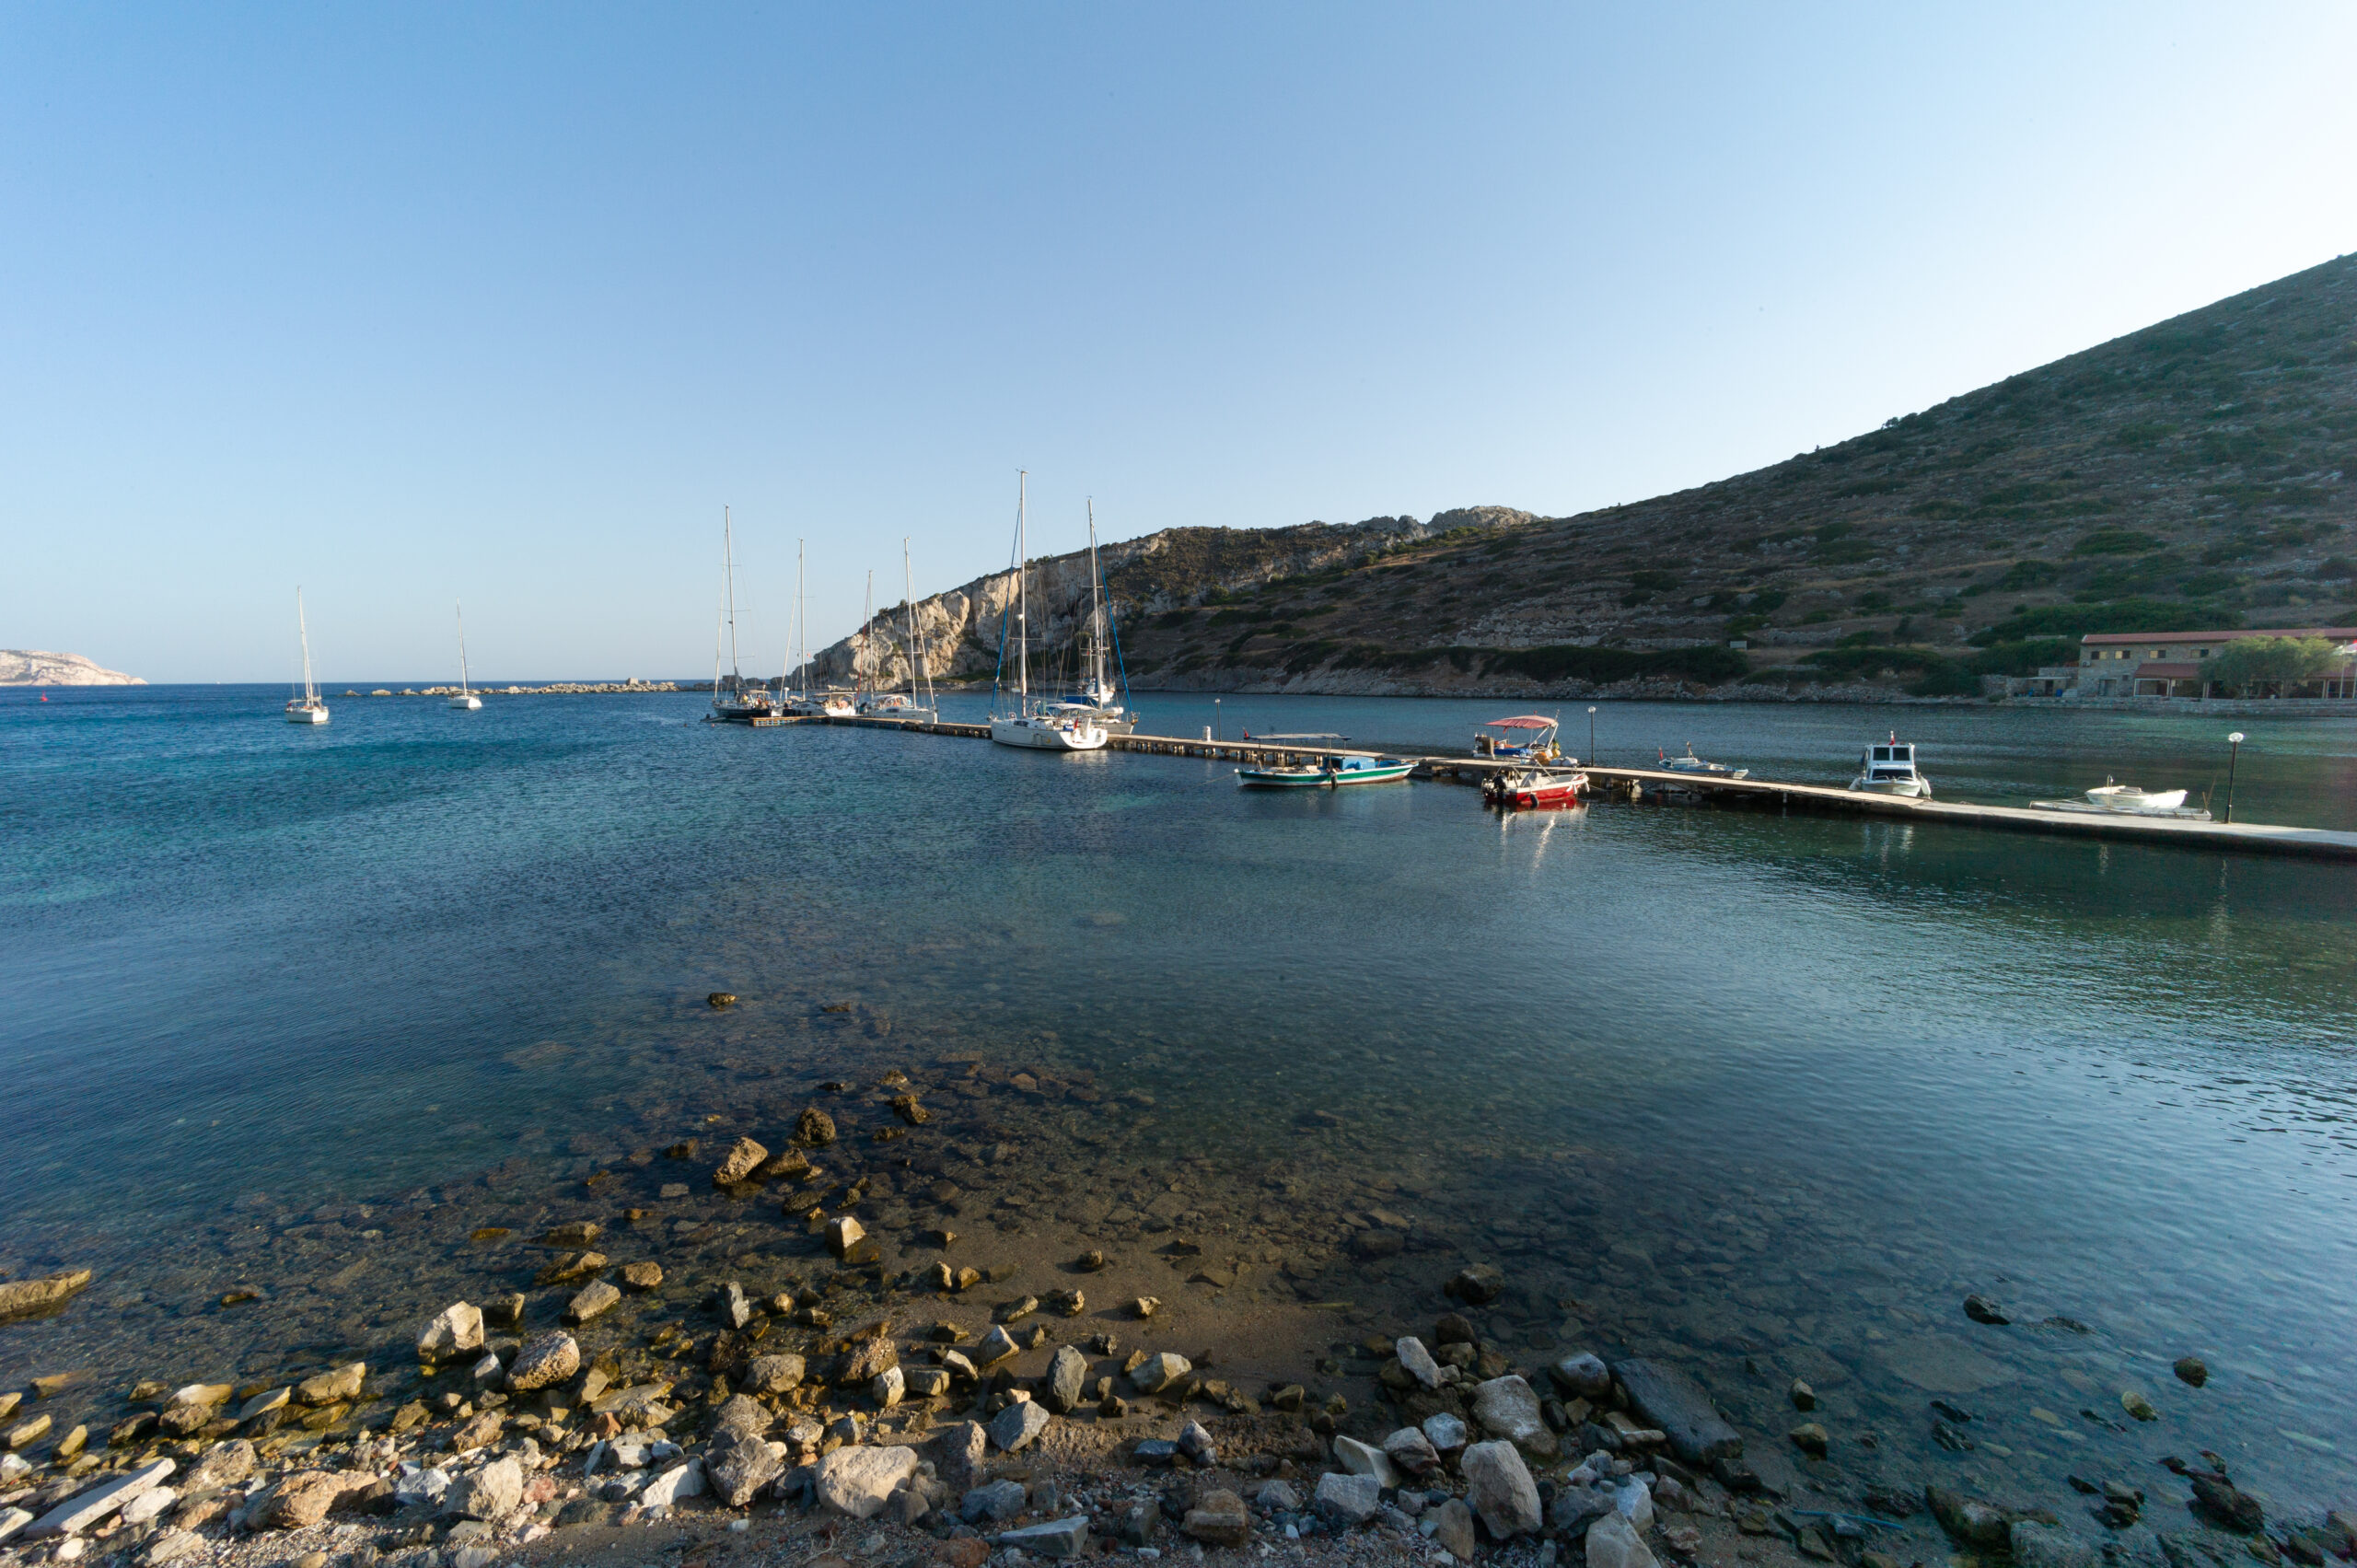 View of the seascape of Knidos Datca in Mugla, Turkey on a clear sky background